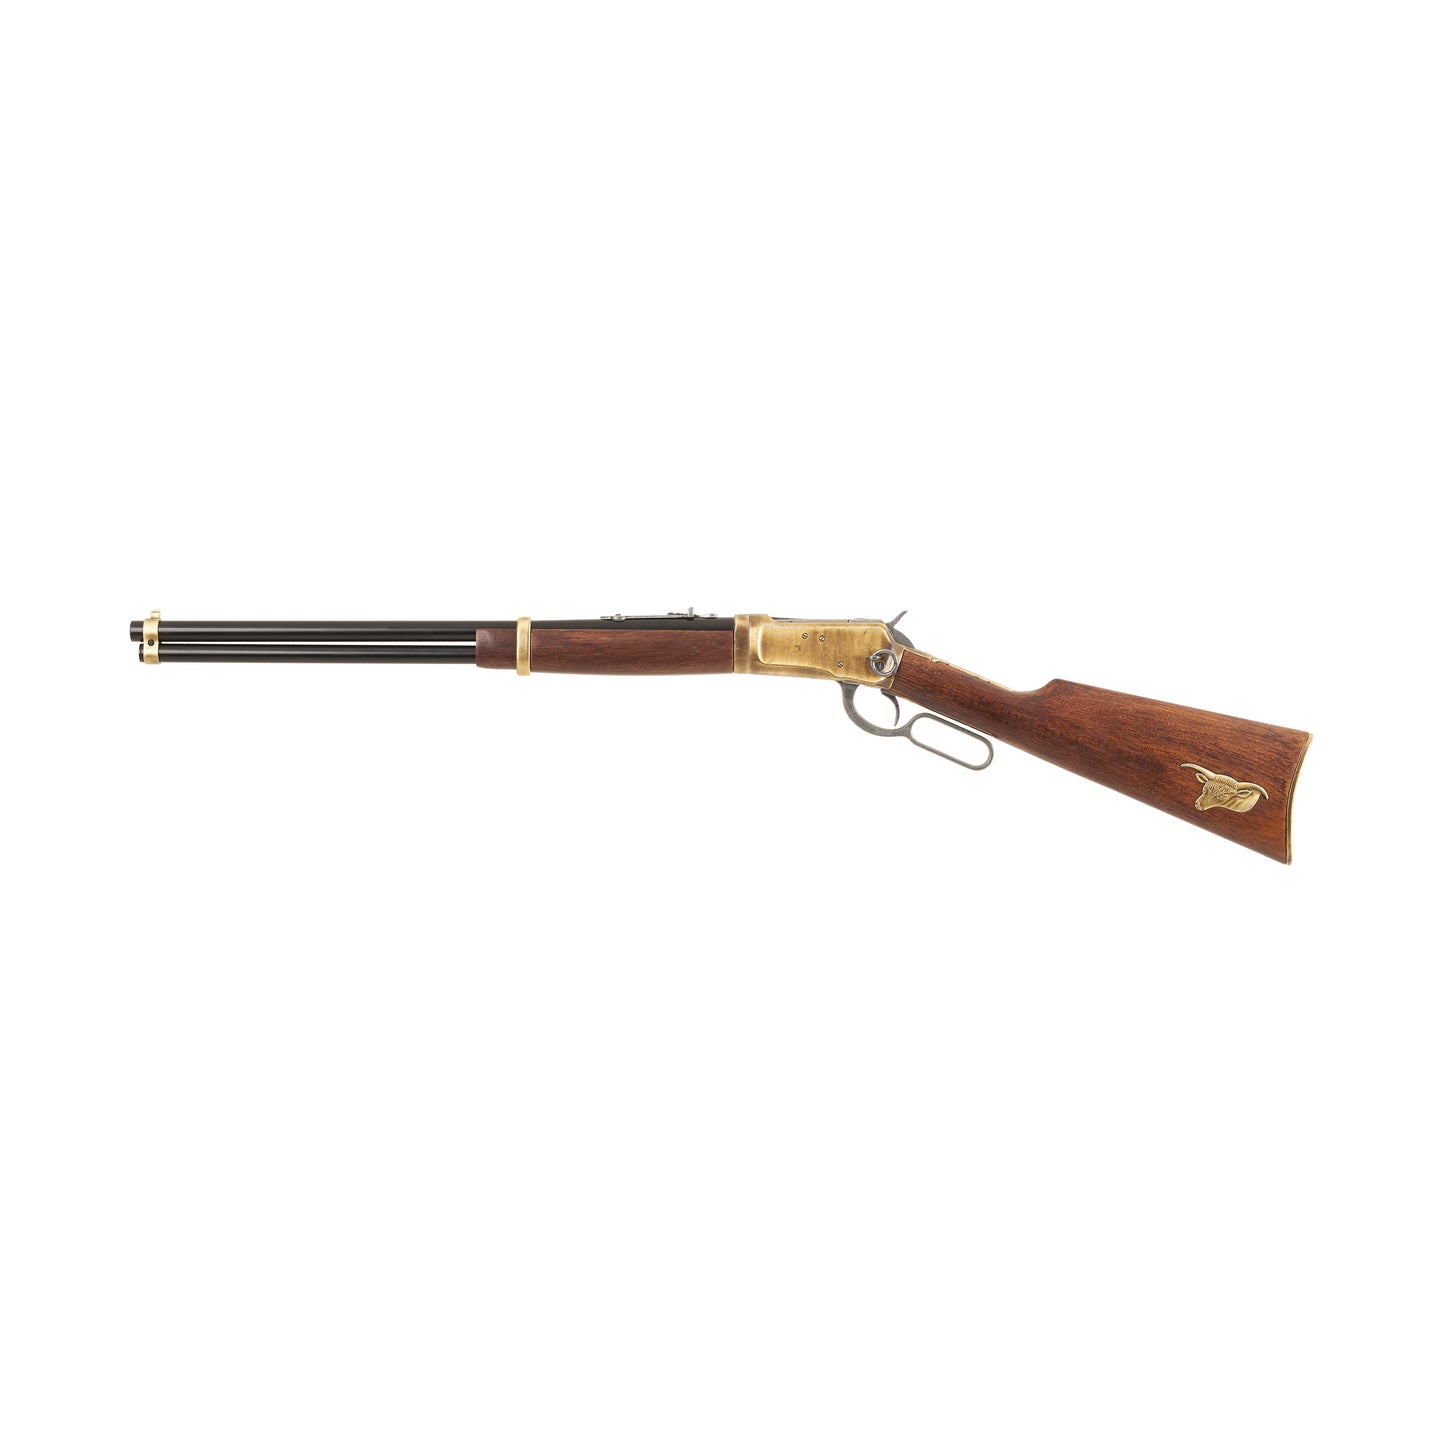 Left side view of 38 inch 1892 Old West Rifle with gray loop lever, brass mechanism and fittings, wood stock, and black barrel.